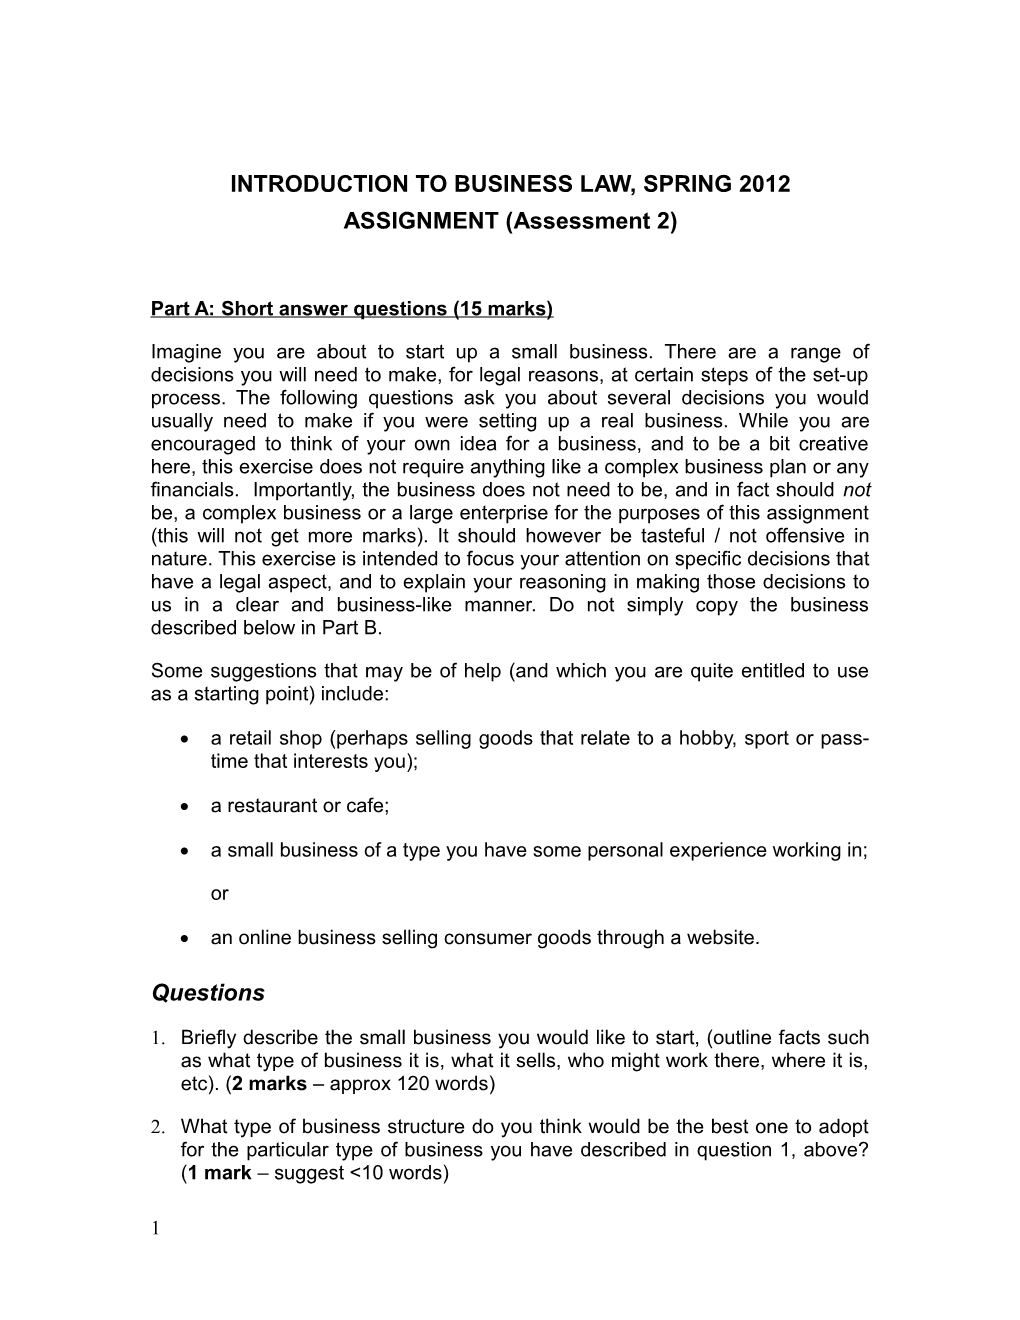 Introduction to Business Law, Spring 2012